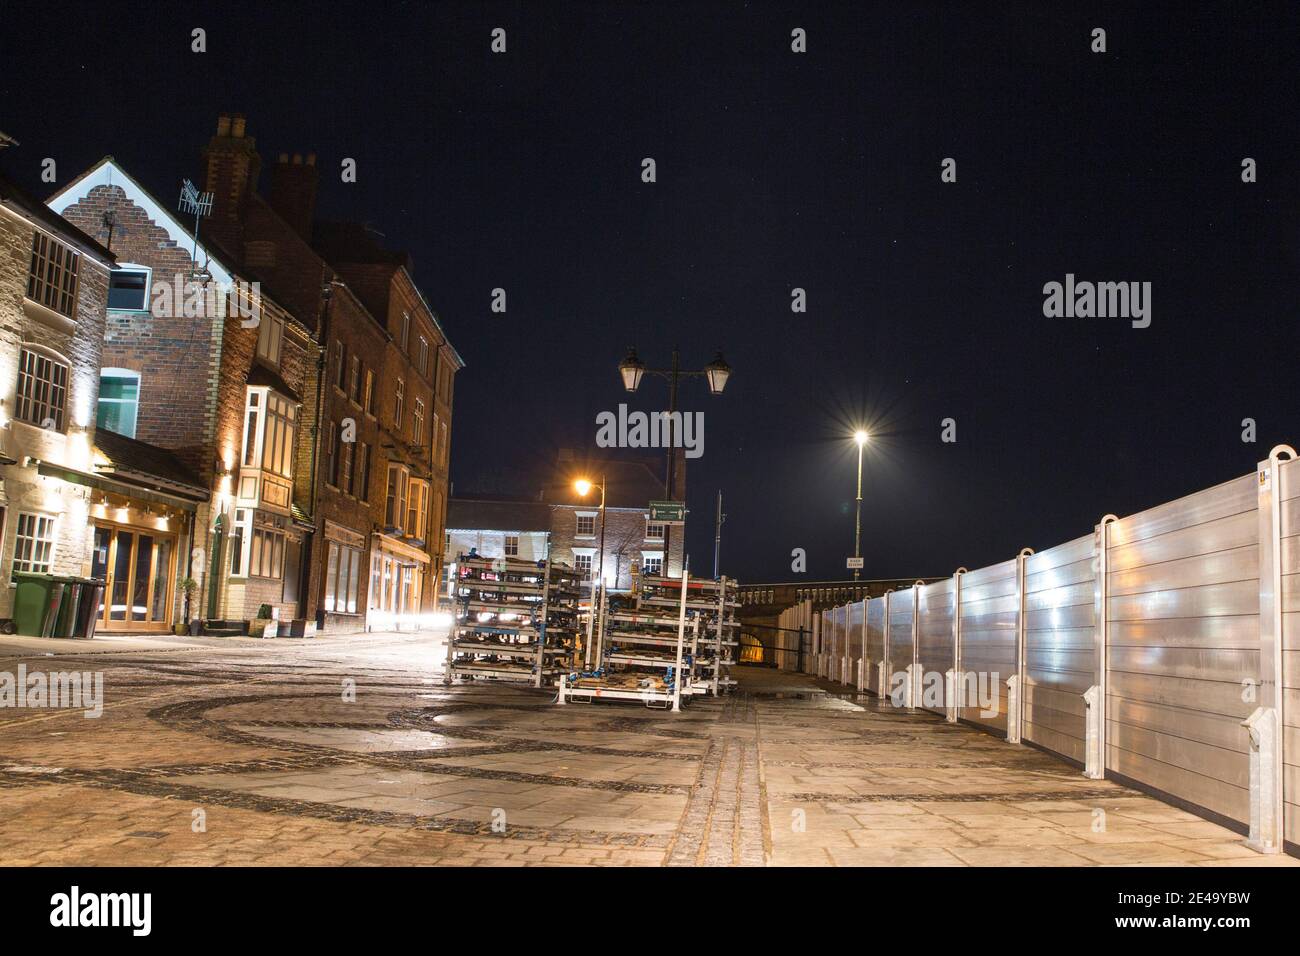 Flood barriers installed in Bewdley beacause of storm Christoph. A photograph taken at night with property fronts lit up along the river front. Stock Photo